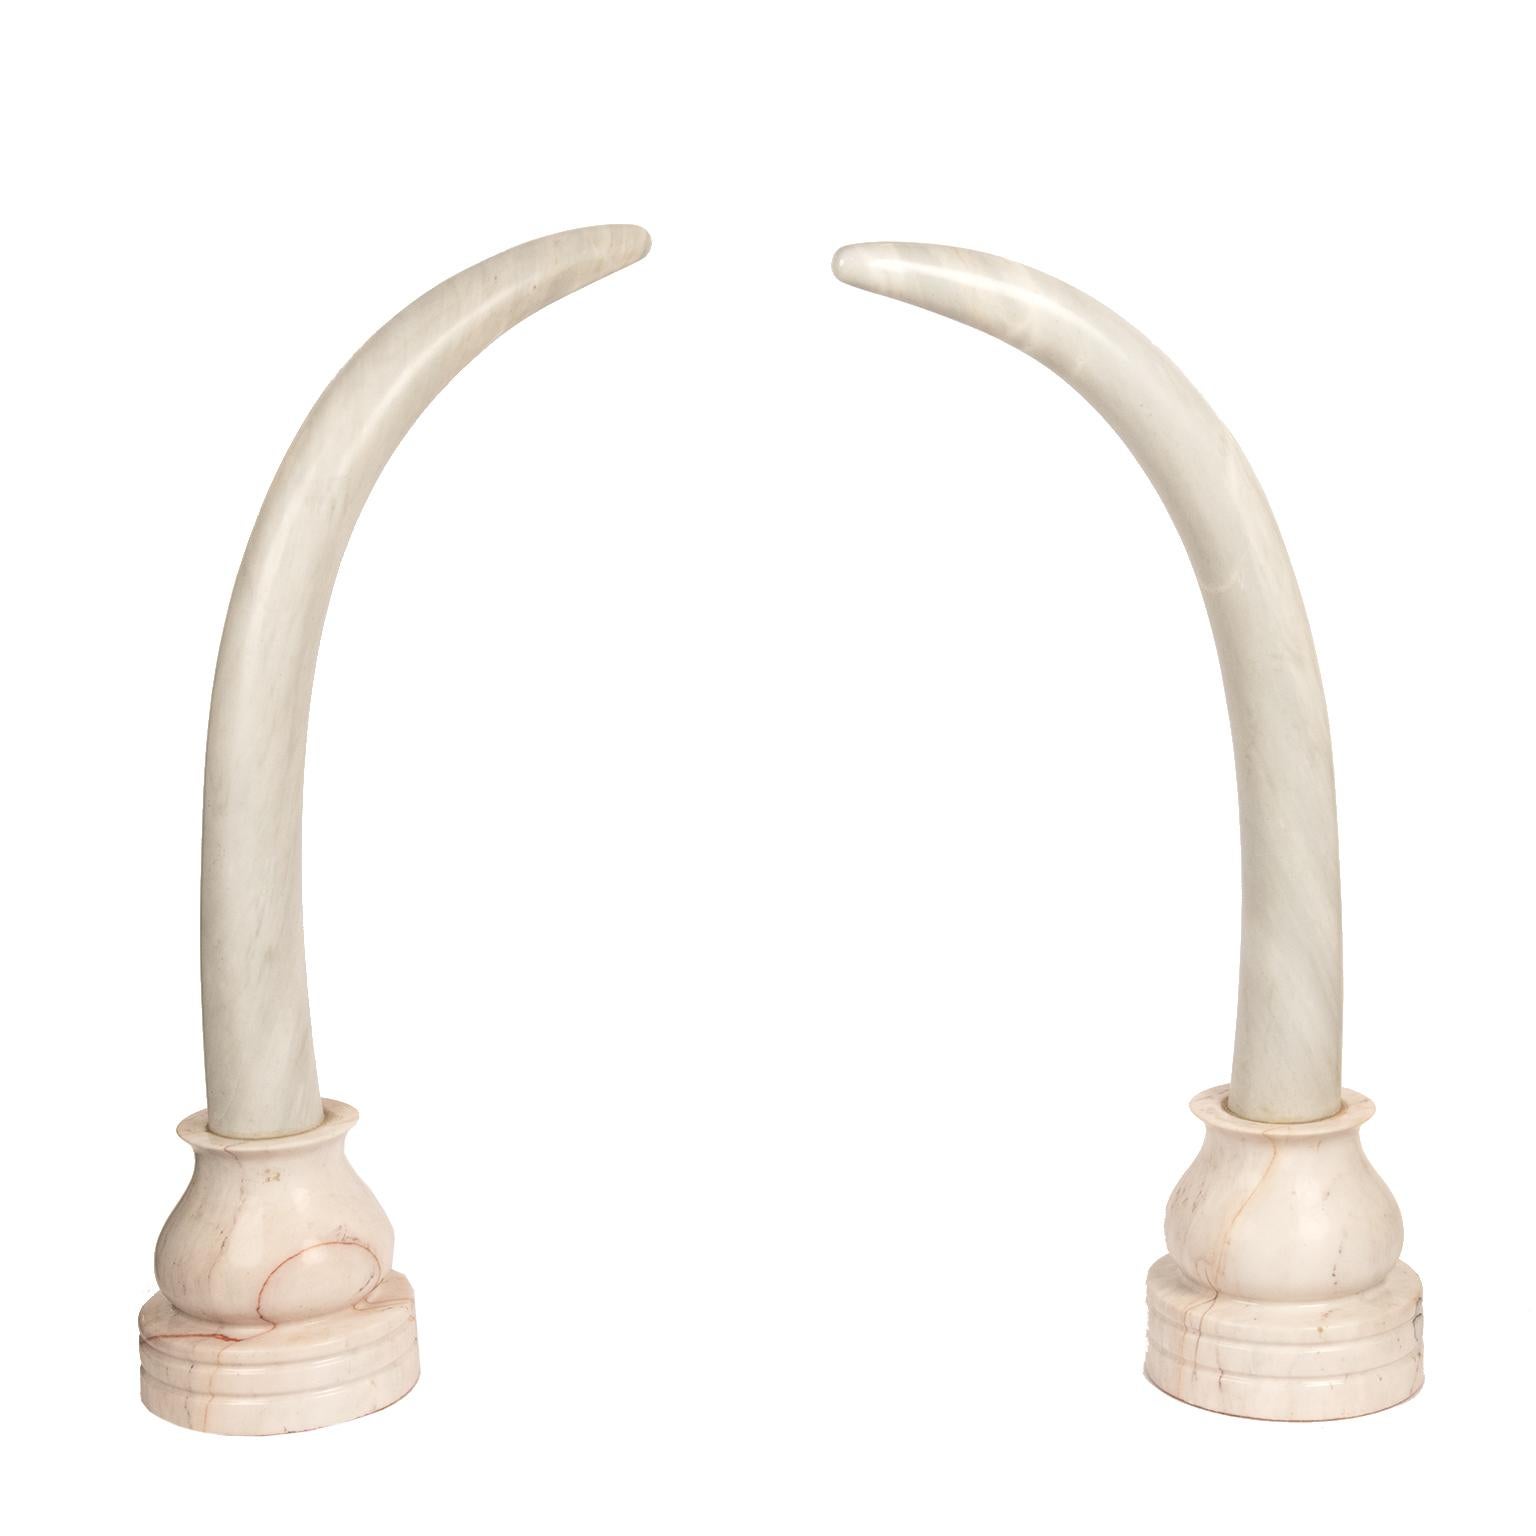 Hand-Crafted Pair Of Marble Elephant Tusks On Complimentary Base